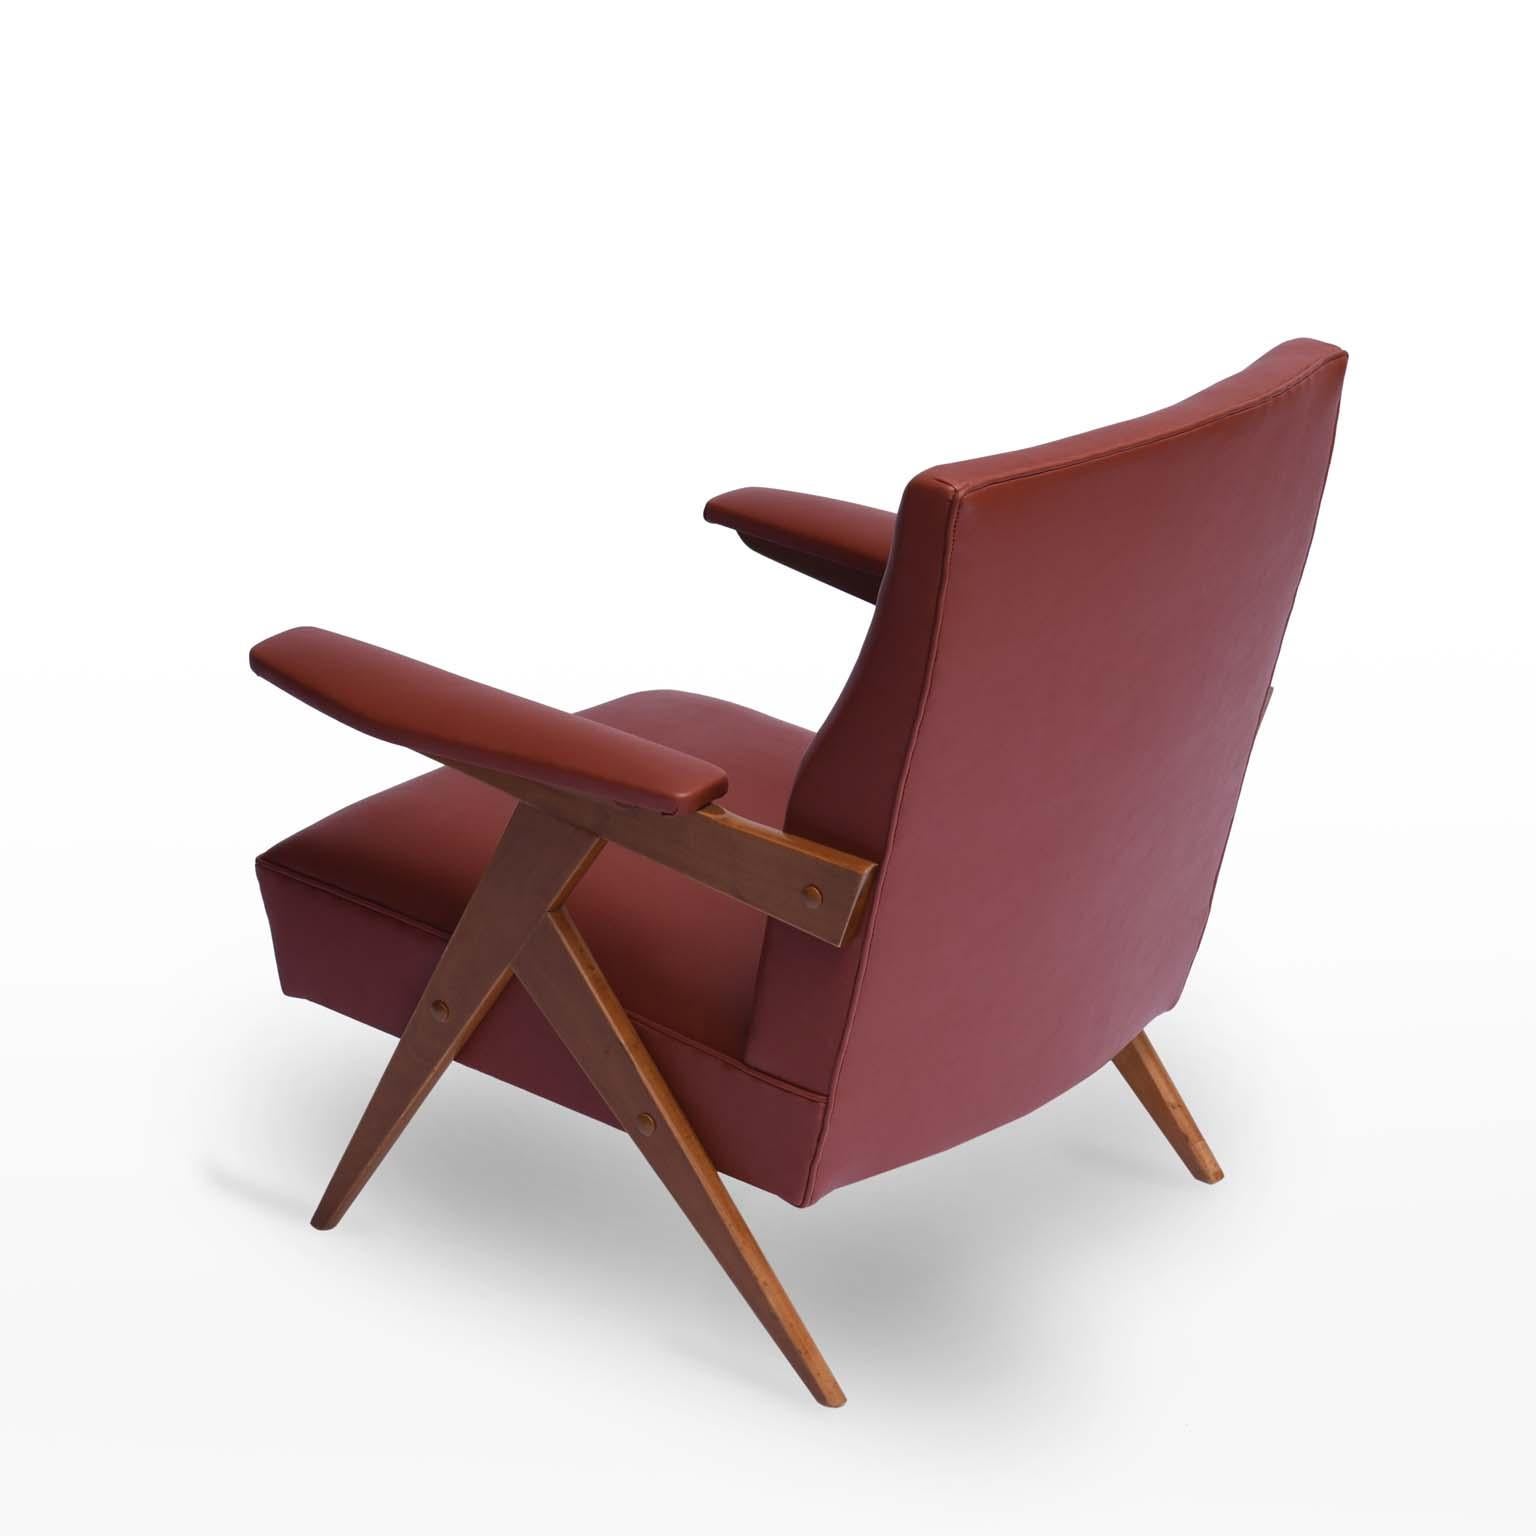 Zanine Caldas midcentury Brazilian armchair in ivory wood, 1950s

Produced by the Móveis Artísticos Z, this comfortable armchair model has upholstery arms for full support of the user arms.
 